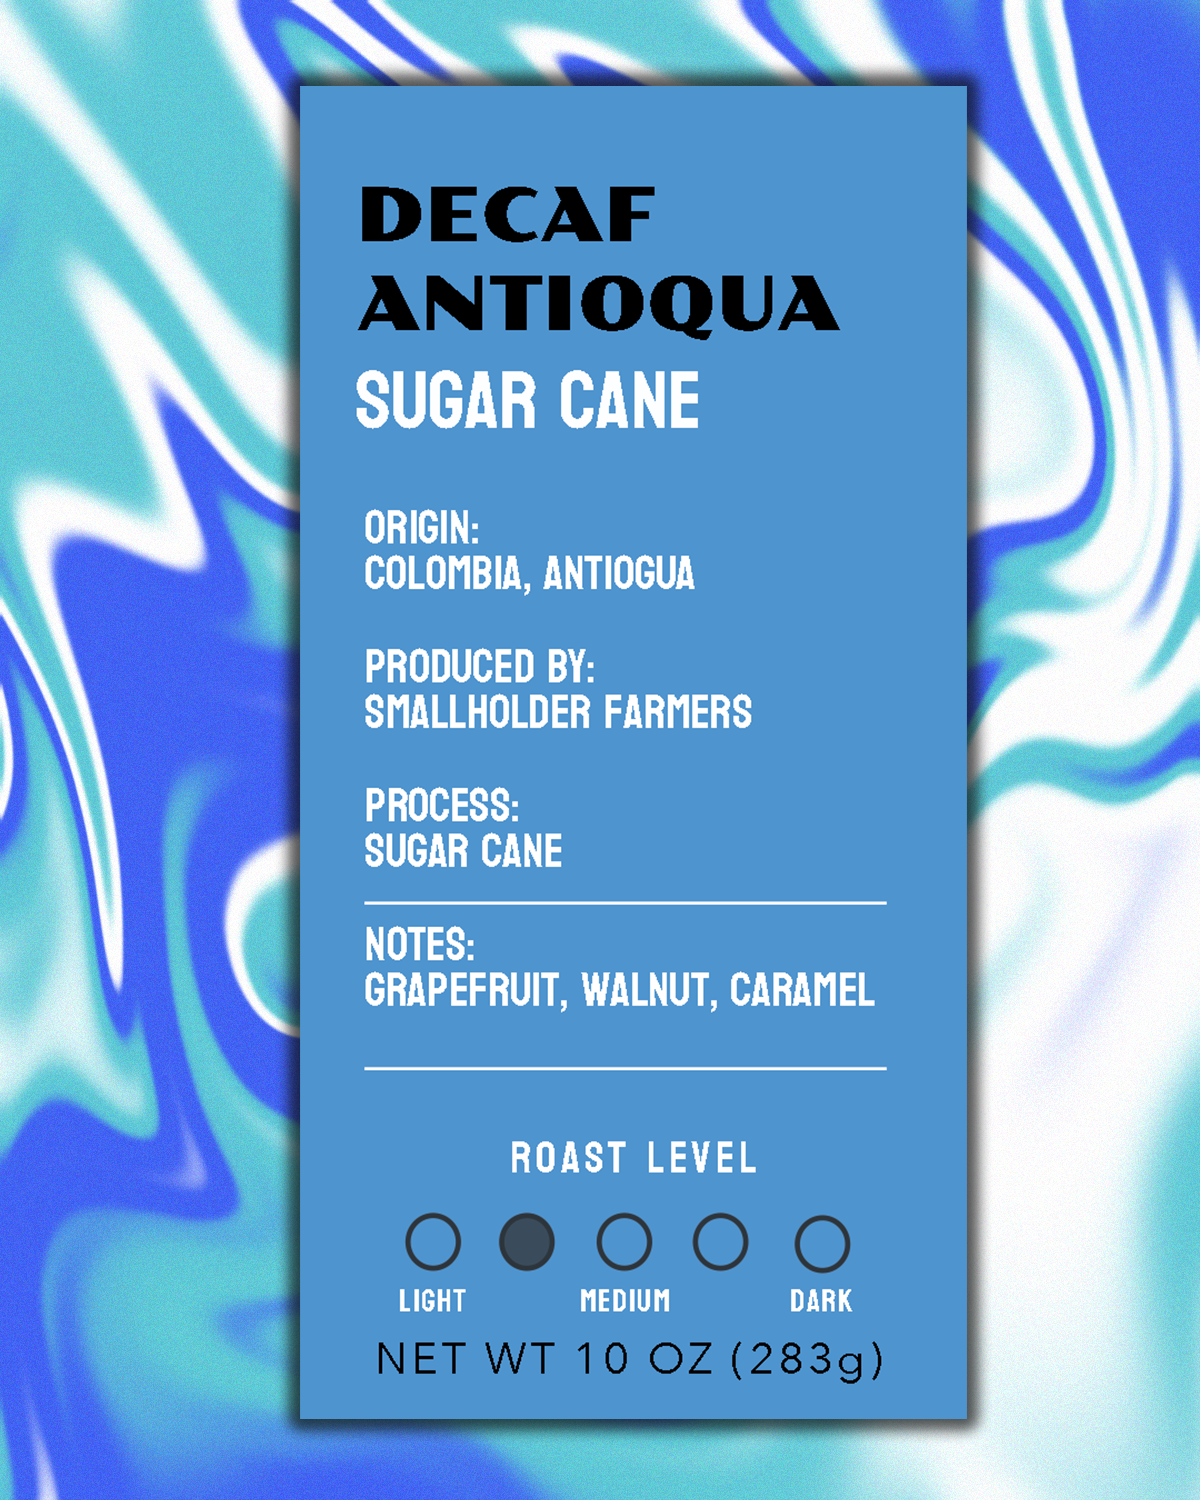 Colombia Antiogua Decaf